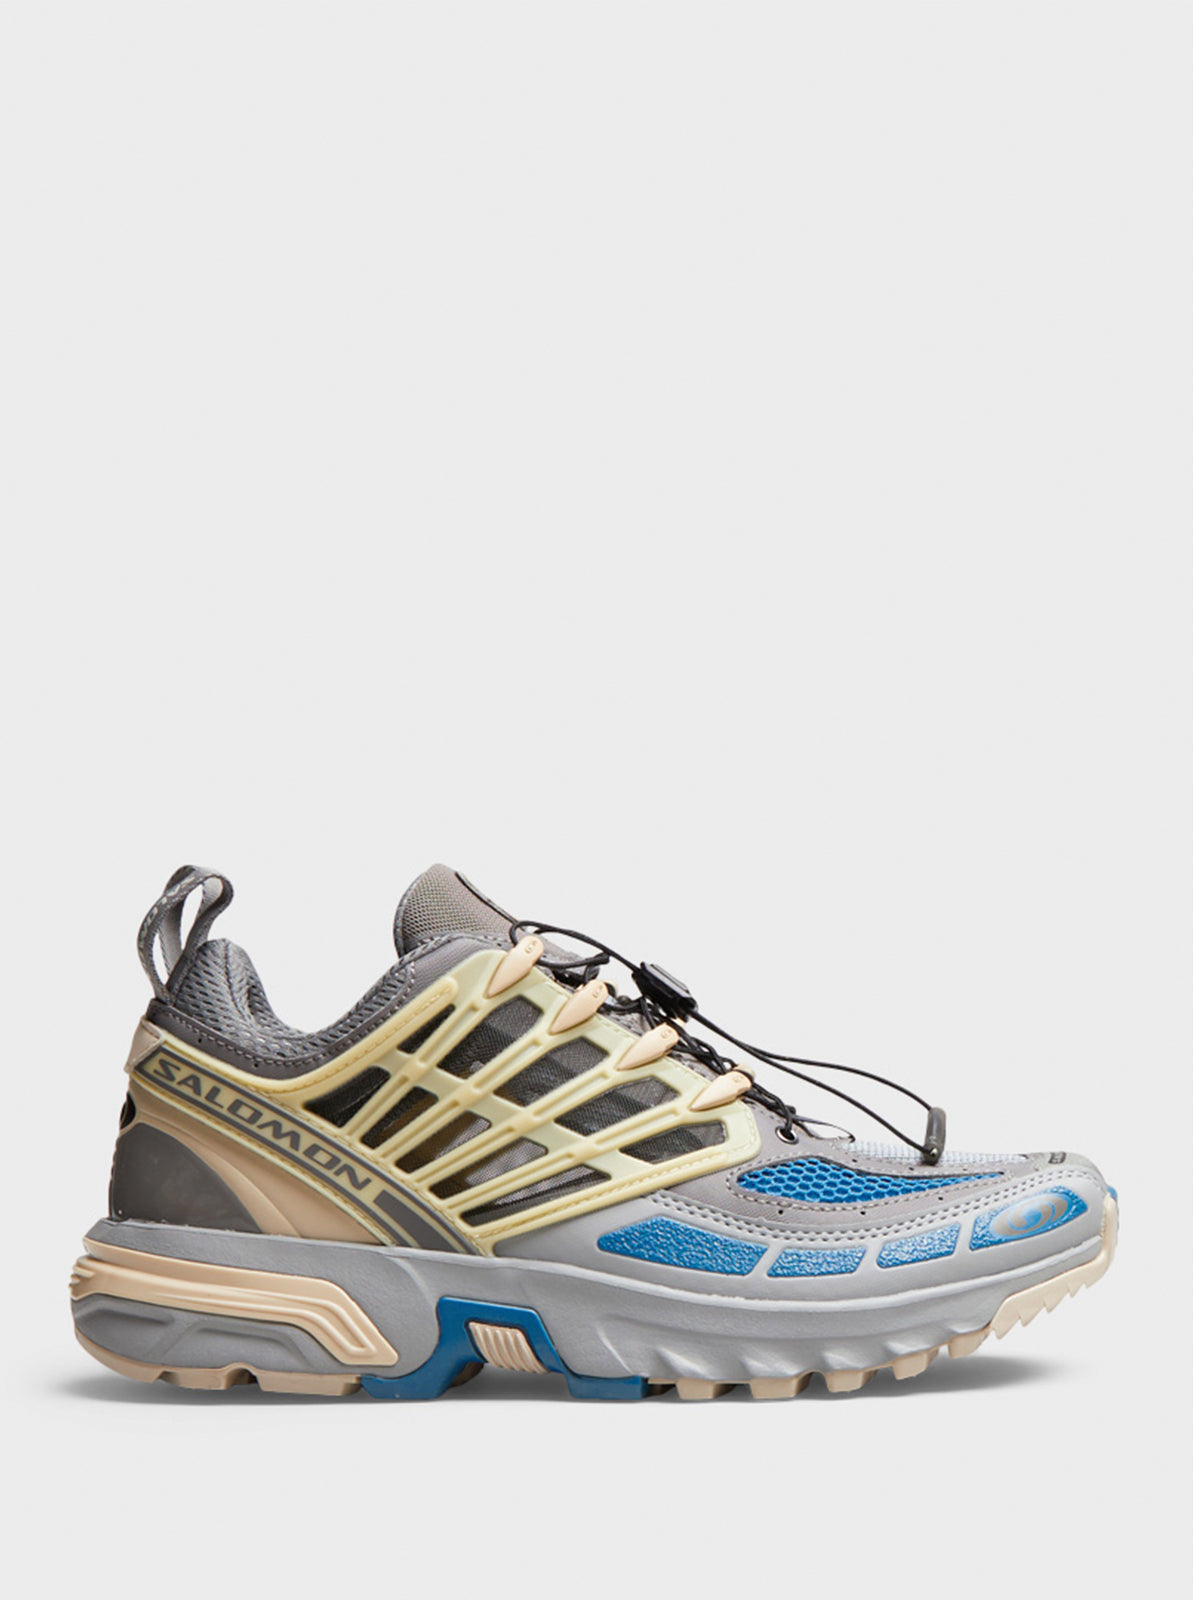 SALOMON - ACS PRO Sneakers in Pewter, Monument and Aegean Blue